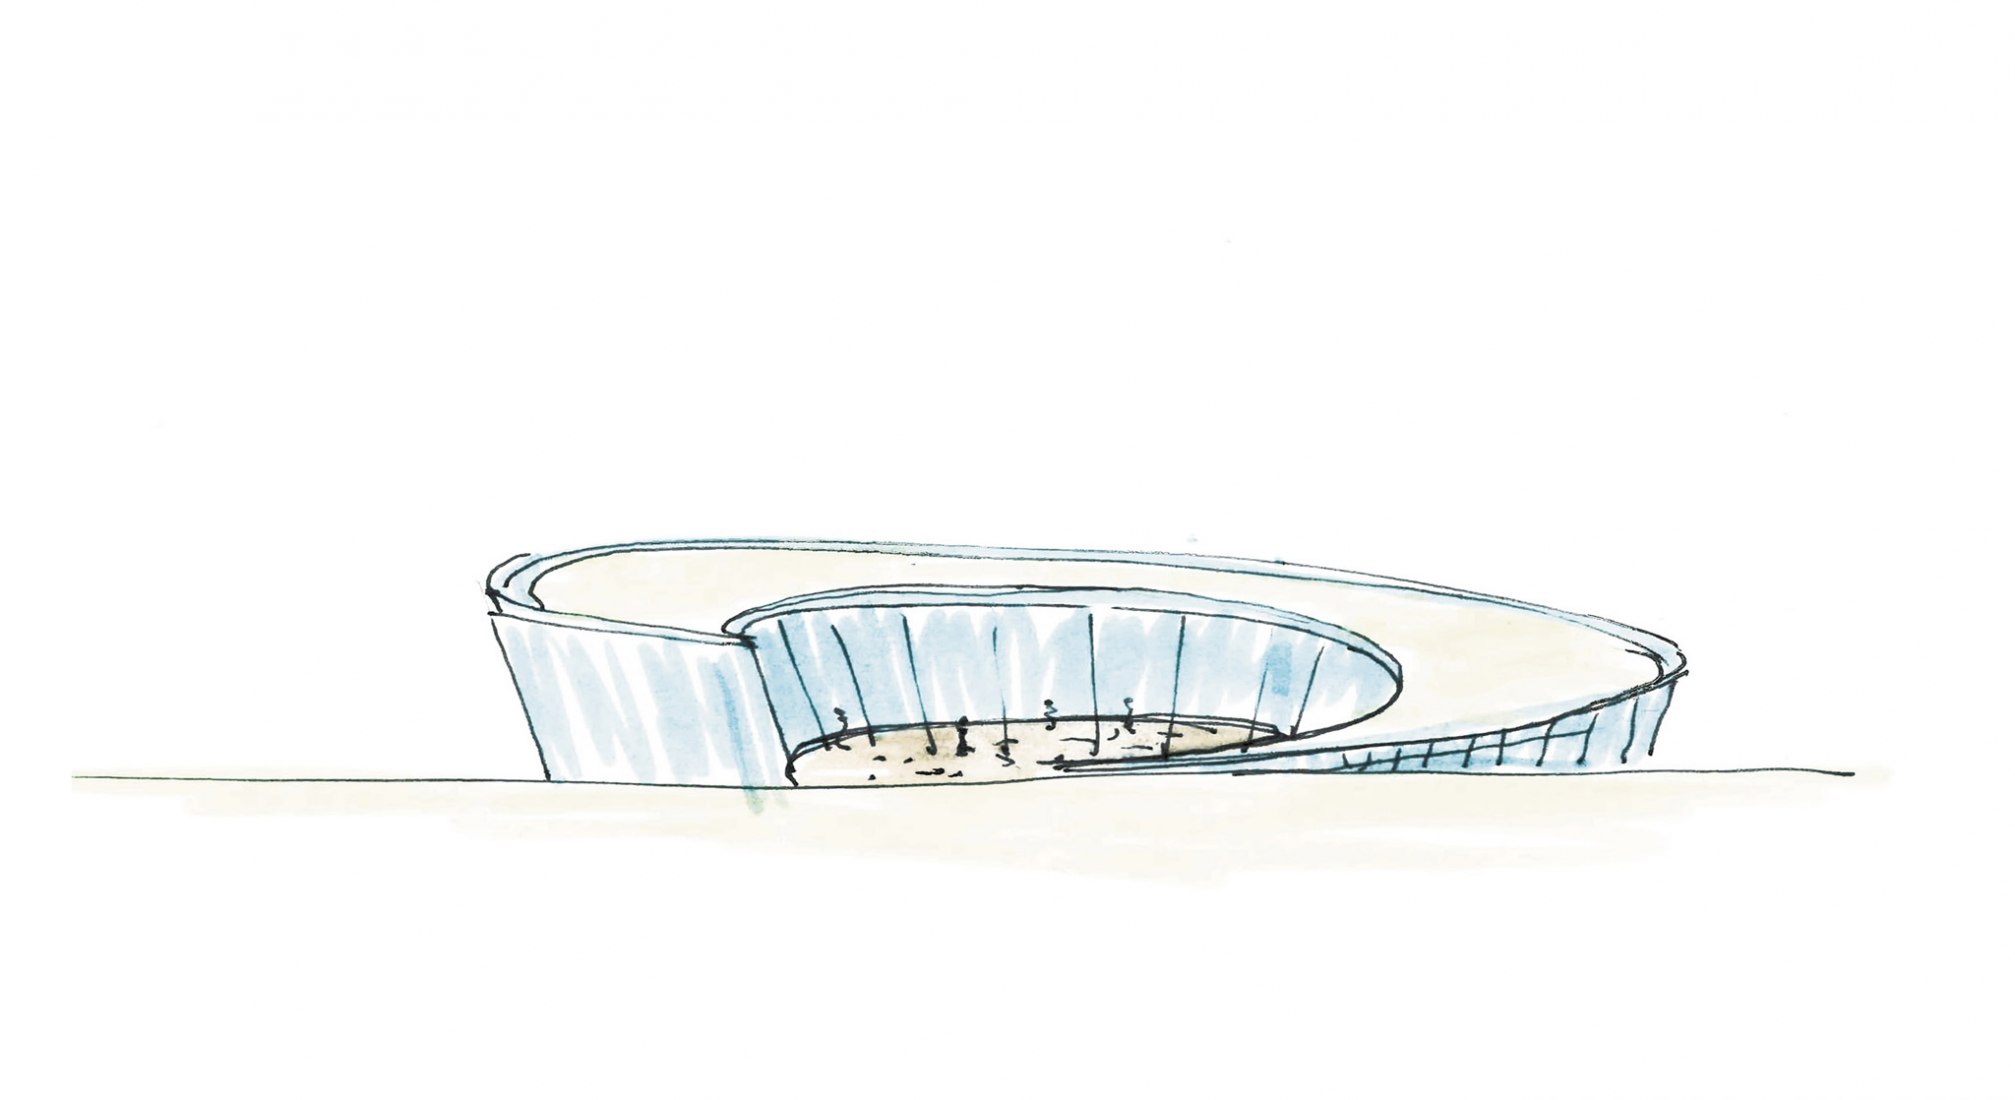 Sketch. New Performing Arts Studio Building for Fisher Center at Bard by Maya Lin Studio with Bialosky and Partners. Rendering courtesy Maya Lin Studio.